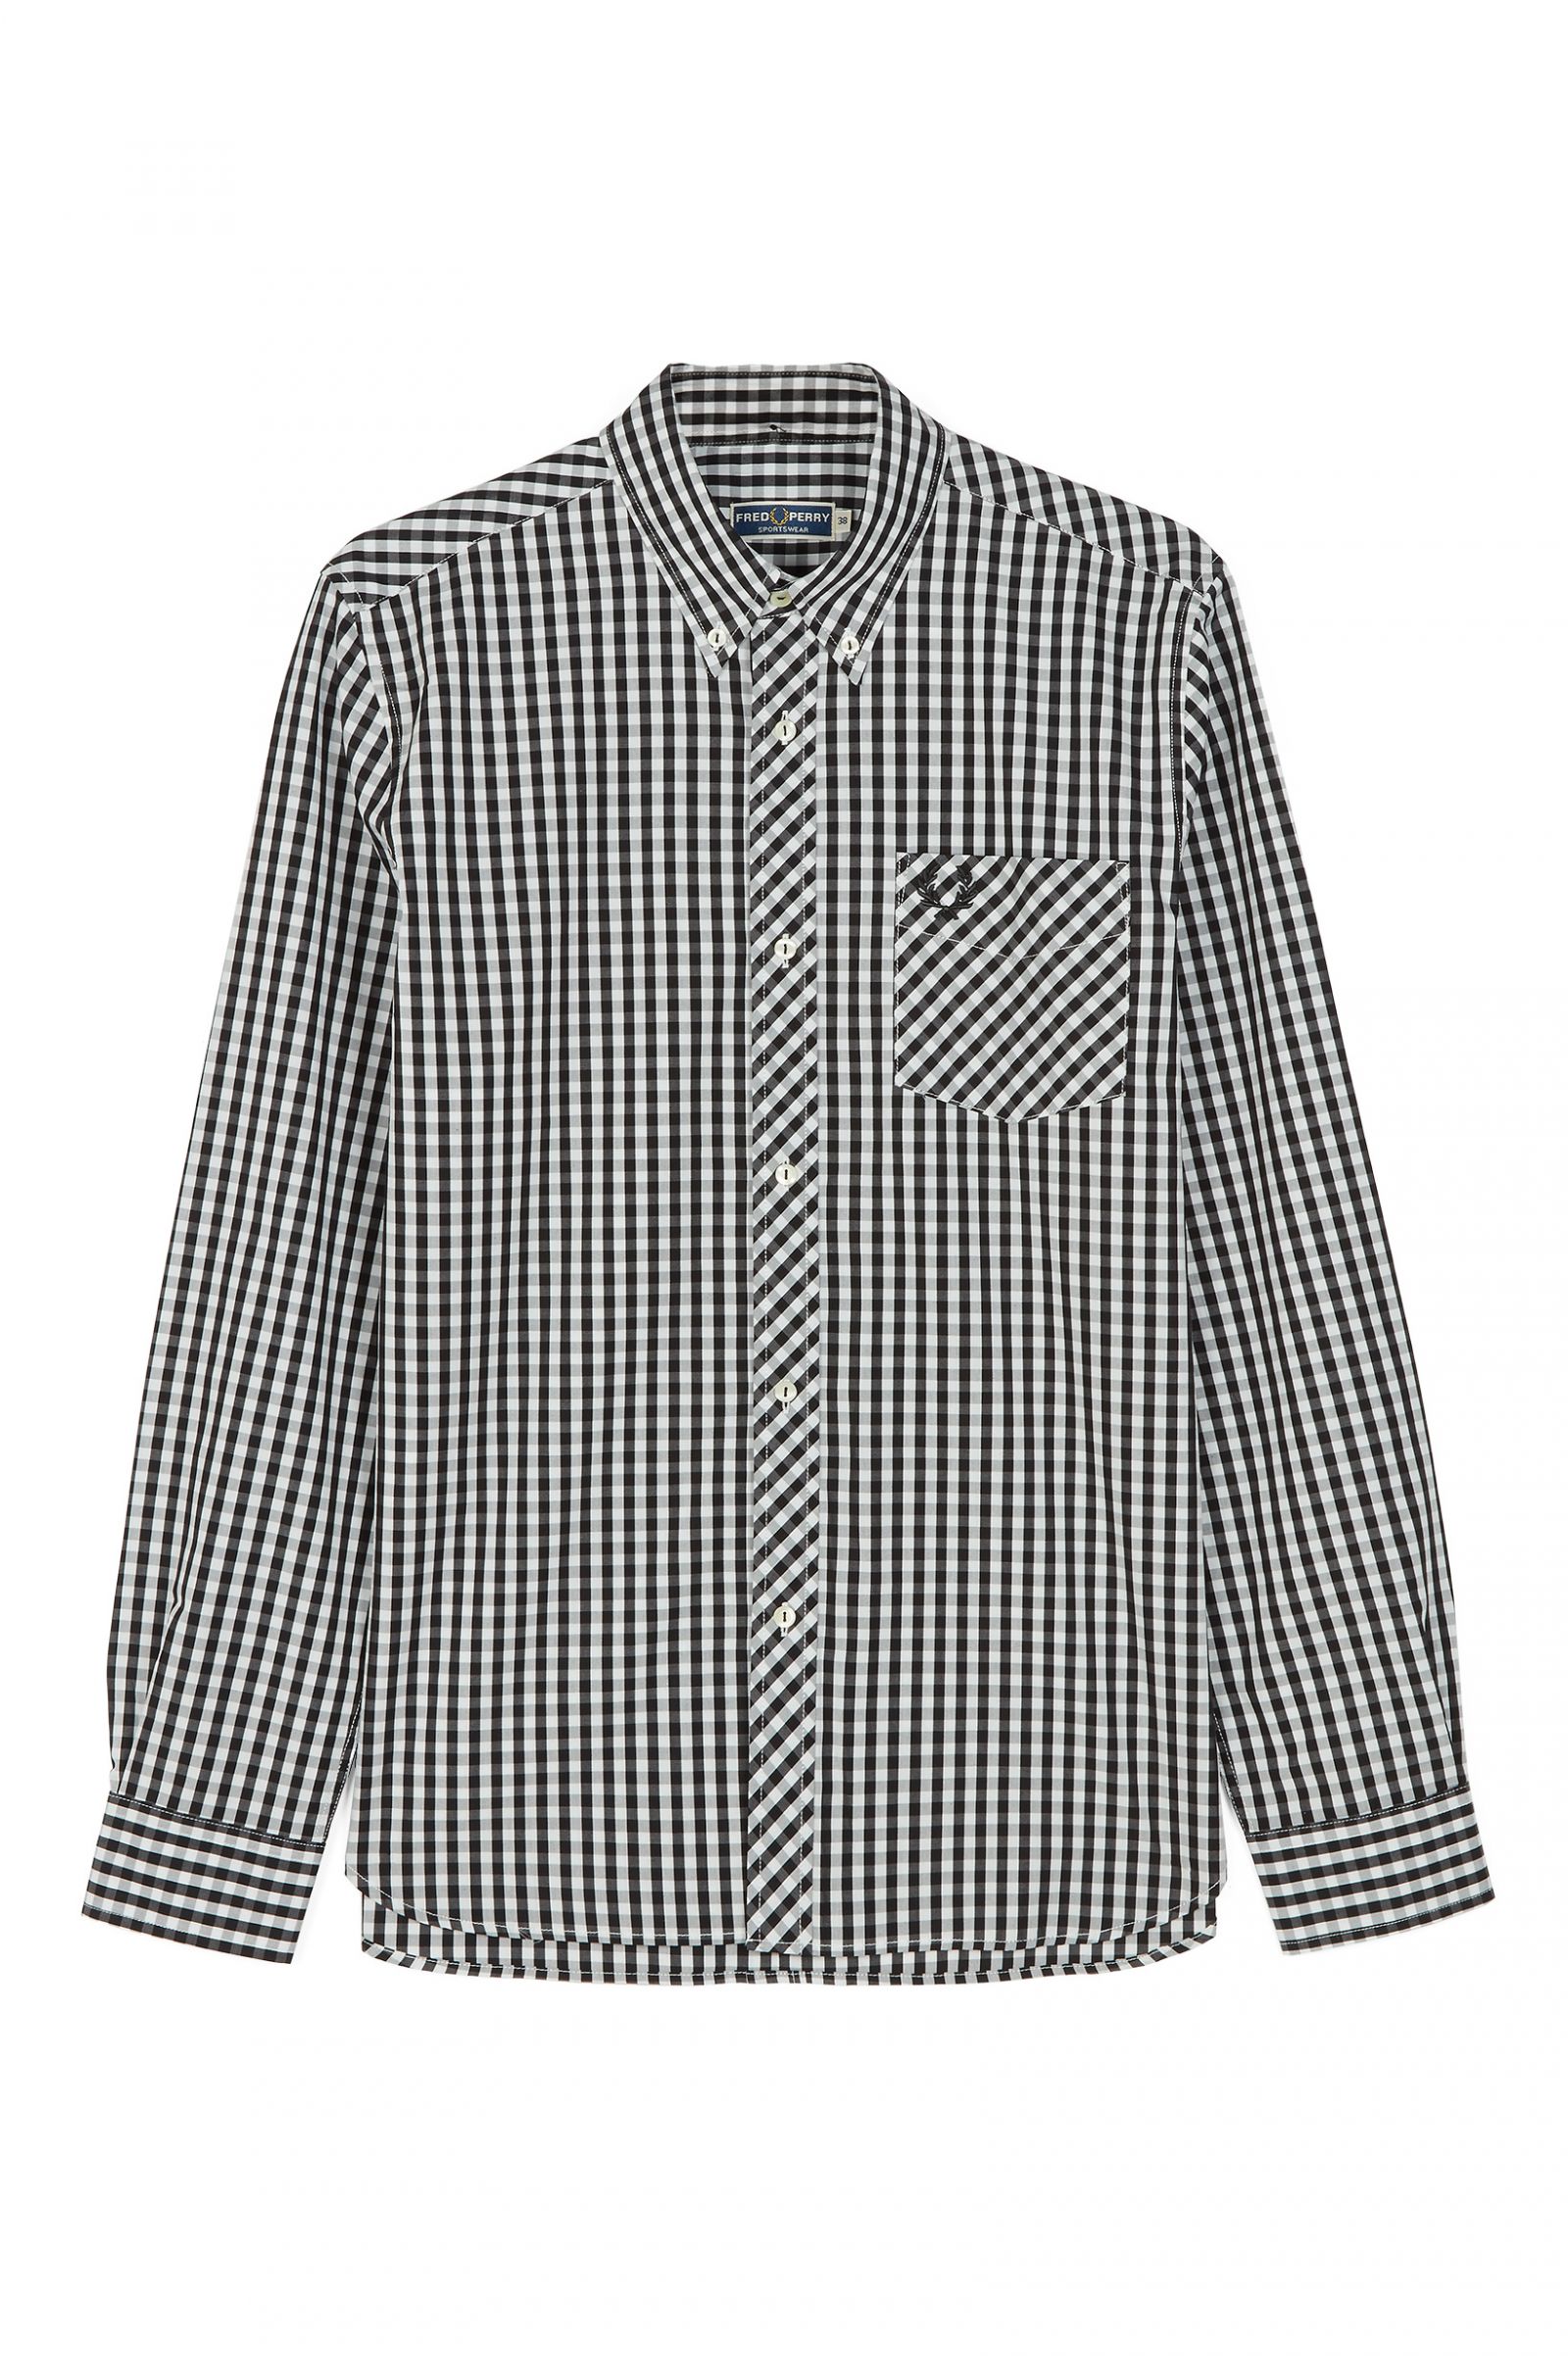 fred perry gingham dress